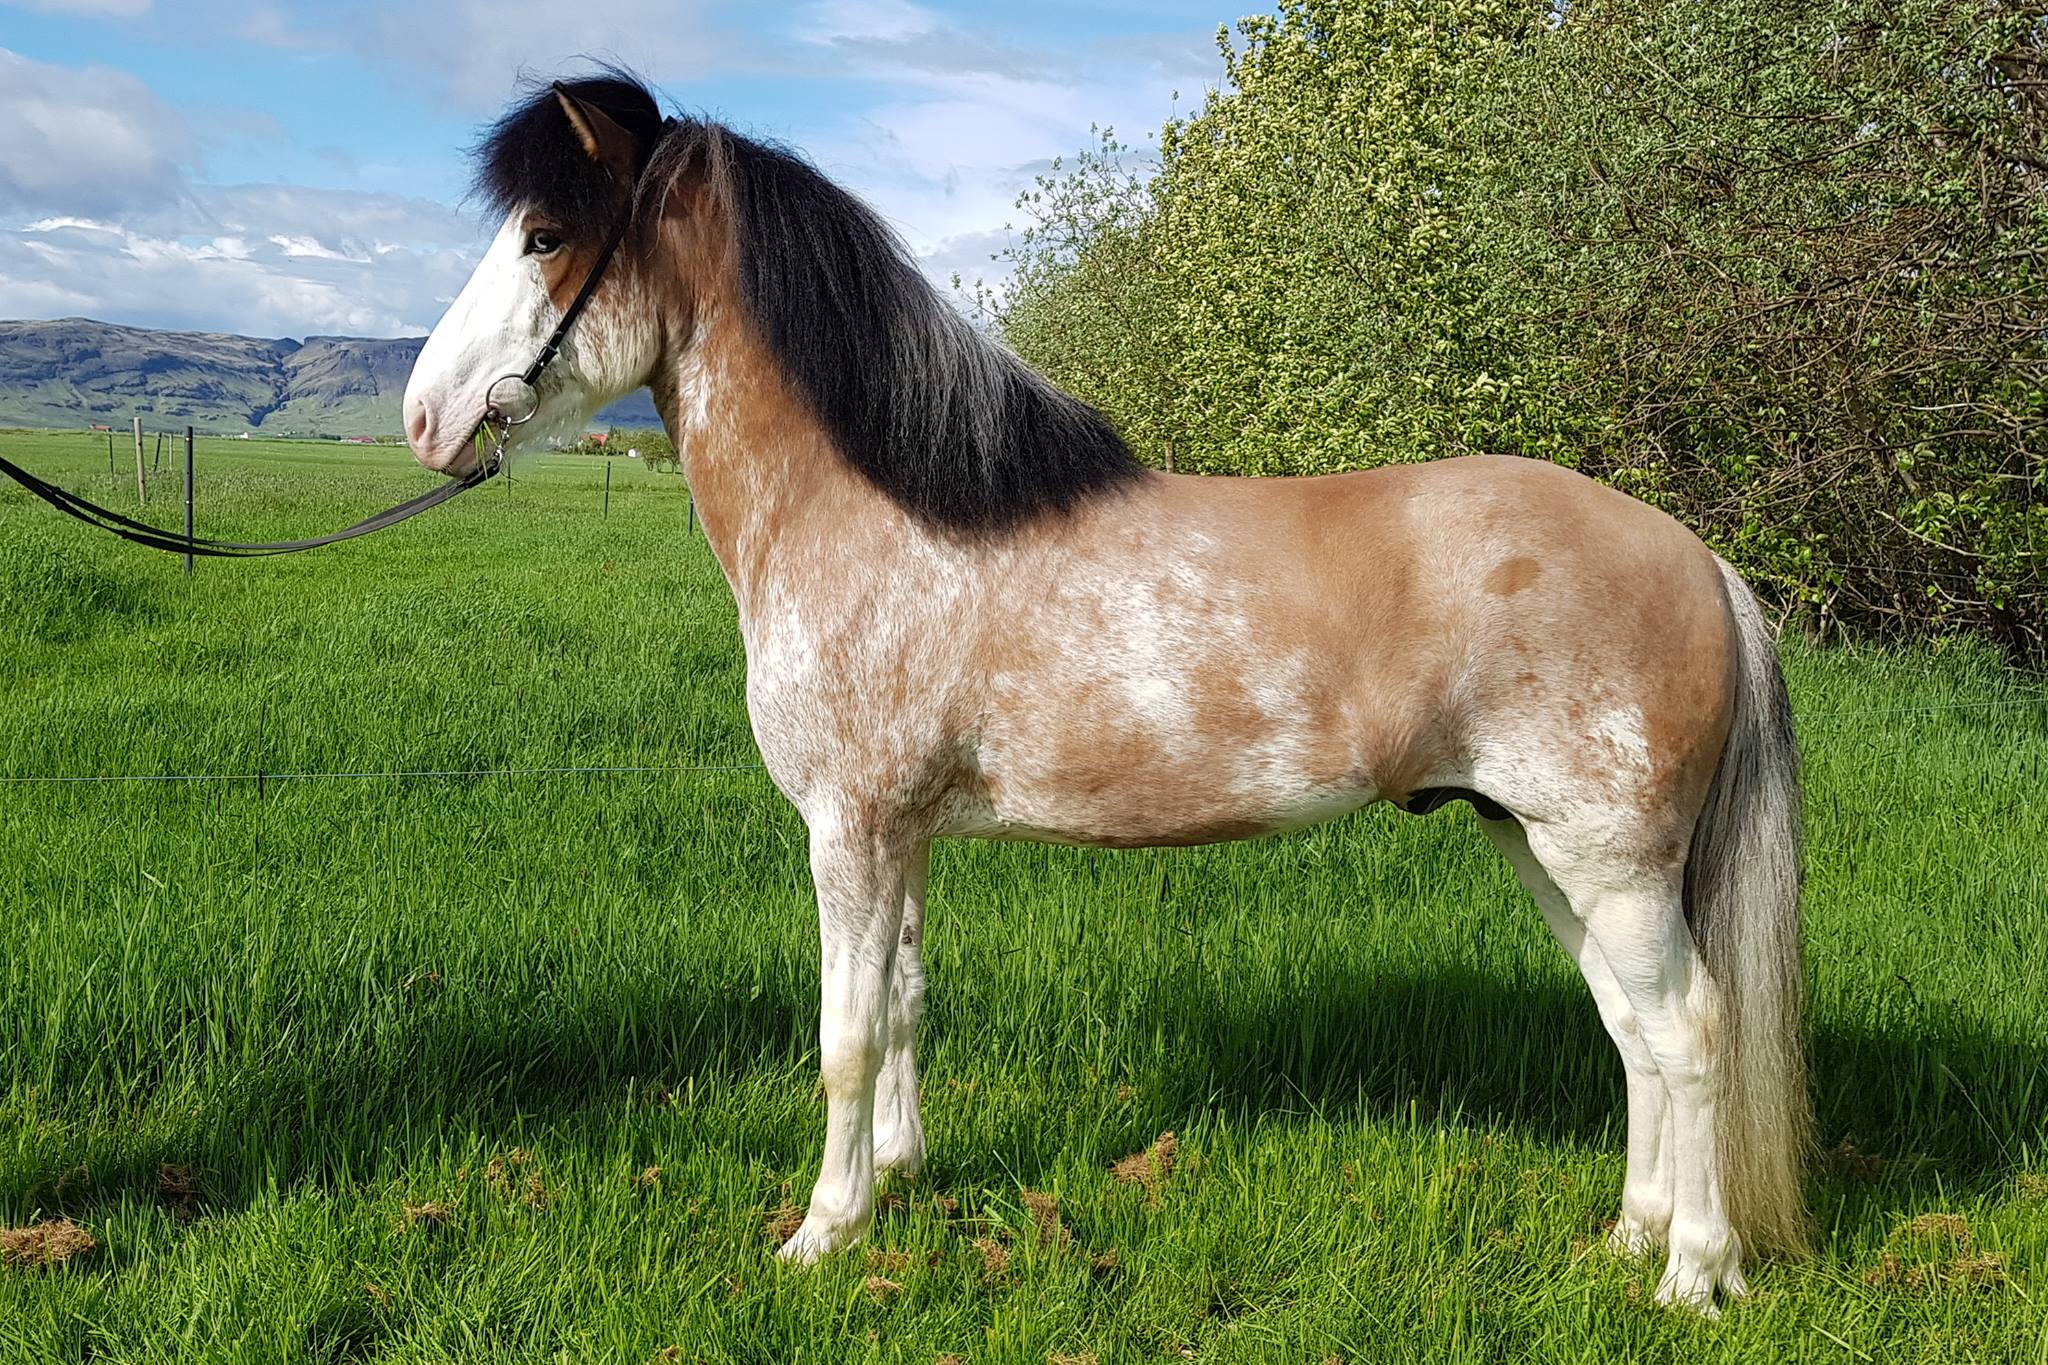 Iceland: New coat color found in Icelandic horse